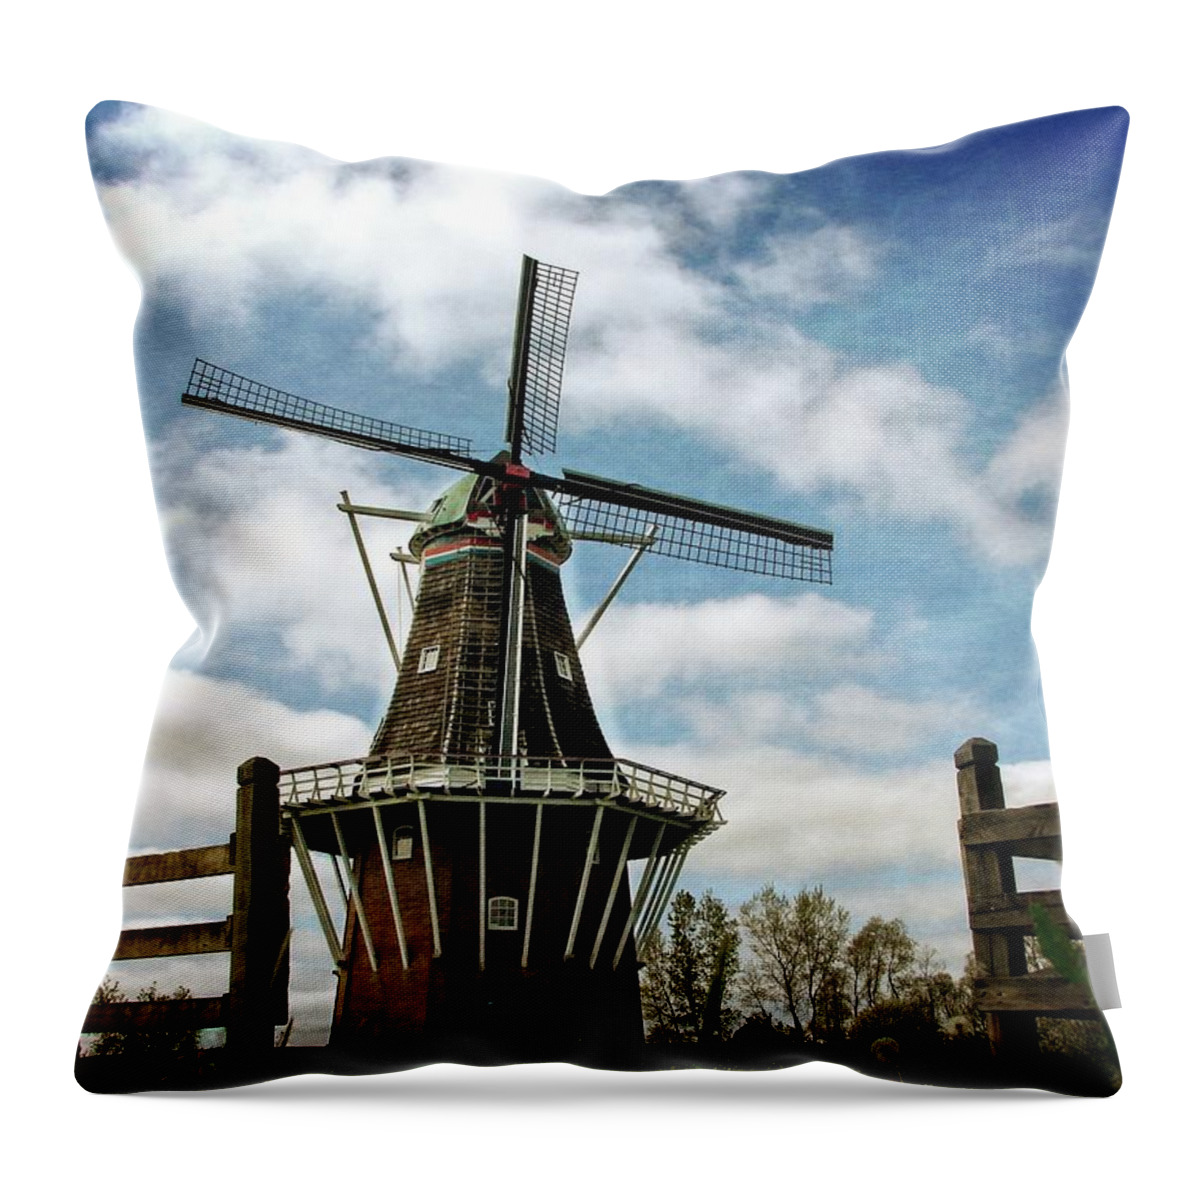 Dezwaan Throw Pillow featuring the photograph DeZwaan Windmill with Fence and Clouds by Michelle Calkins